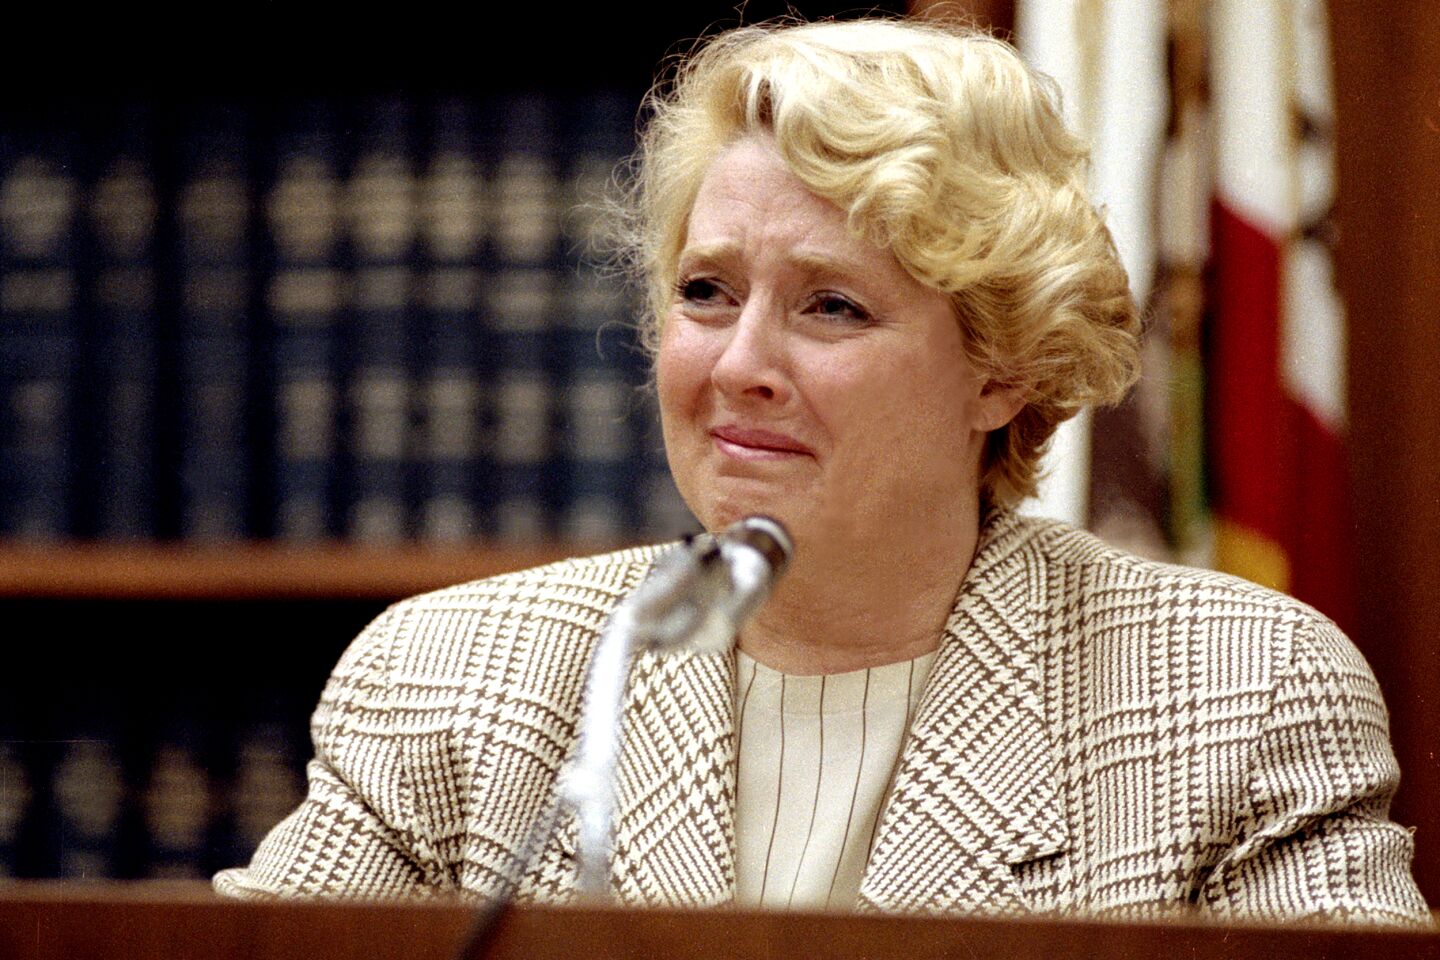 Broderick fights back tears while answering questions from defense attorney Jack Earley on Oct. 30, 1990.